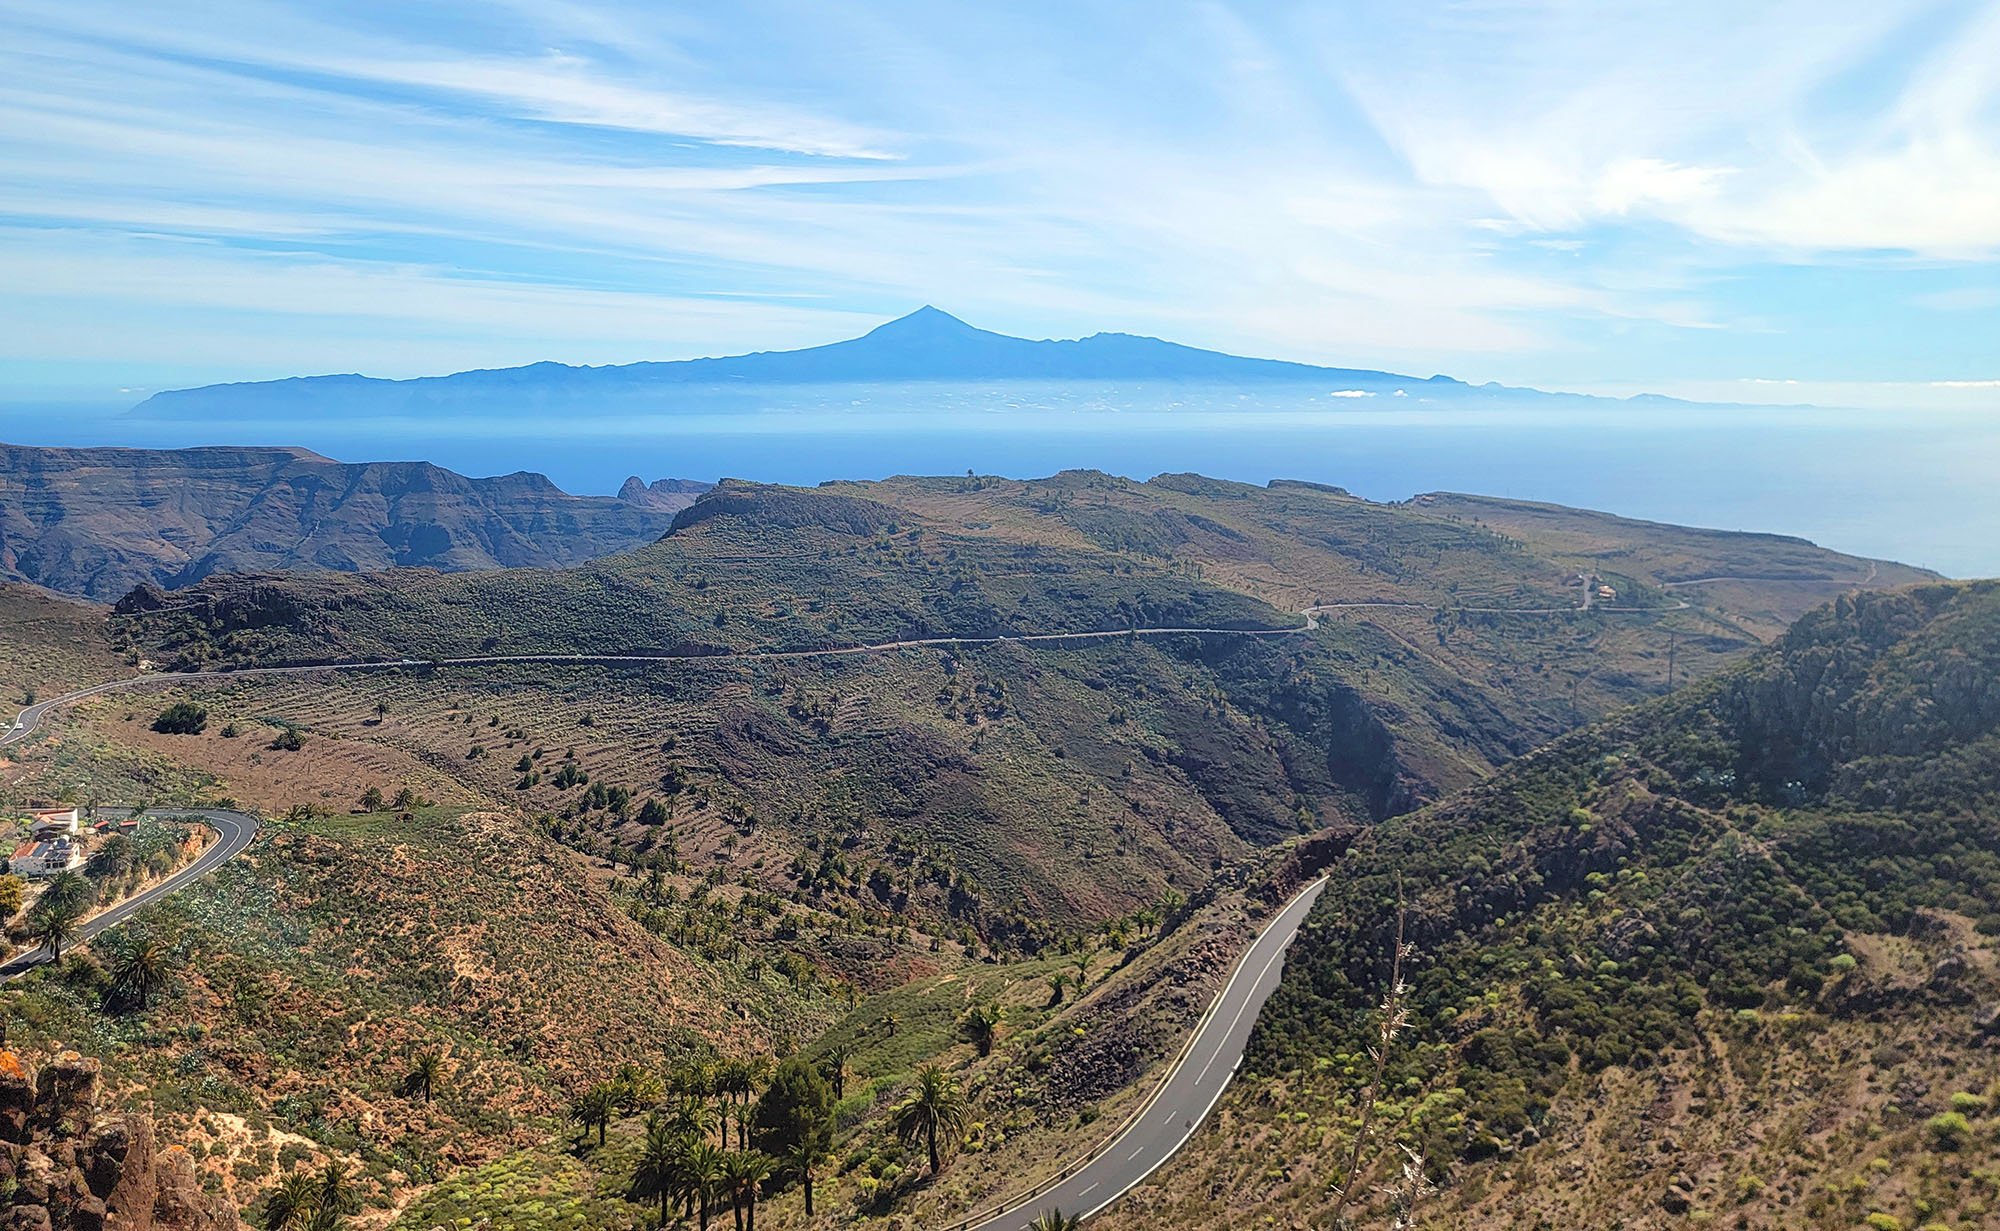 Look at this crazy view of Tenerife and of various canyons on La Gomera.